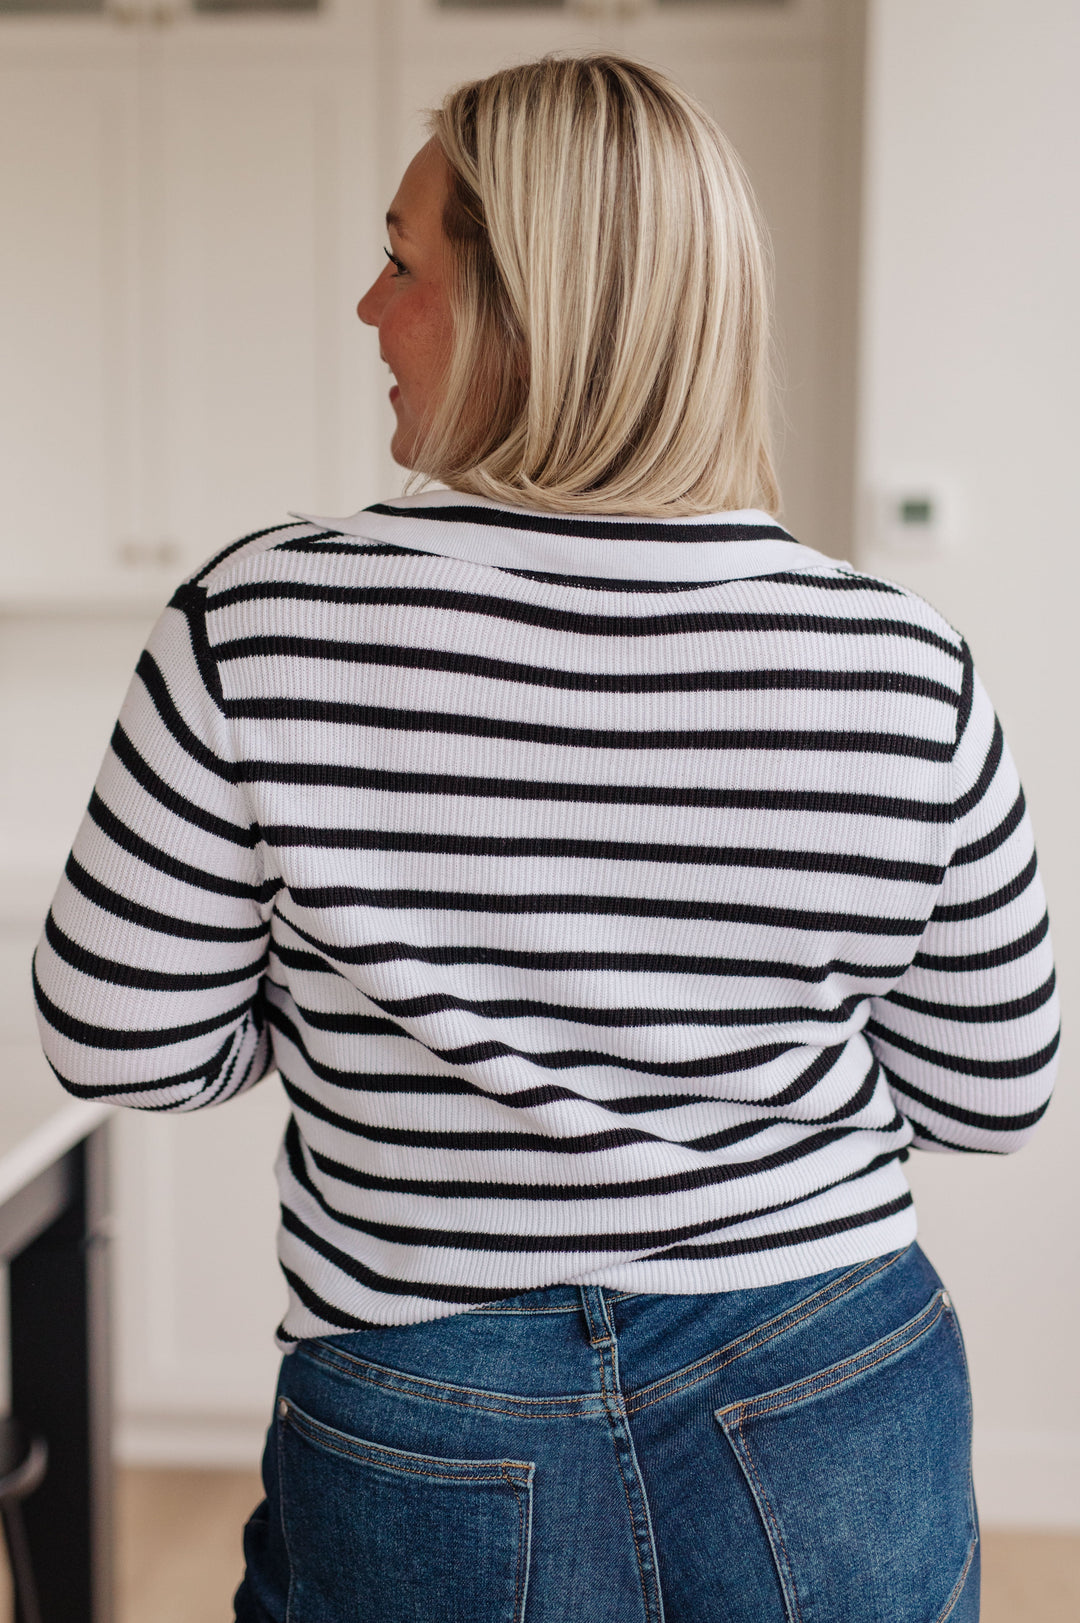 Self Improvement V-Neck Striped Sweater-Sweaters/Sweatshirts-Inspired by Justeen-Women's Clothing Boutique